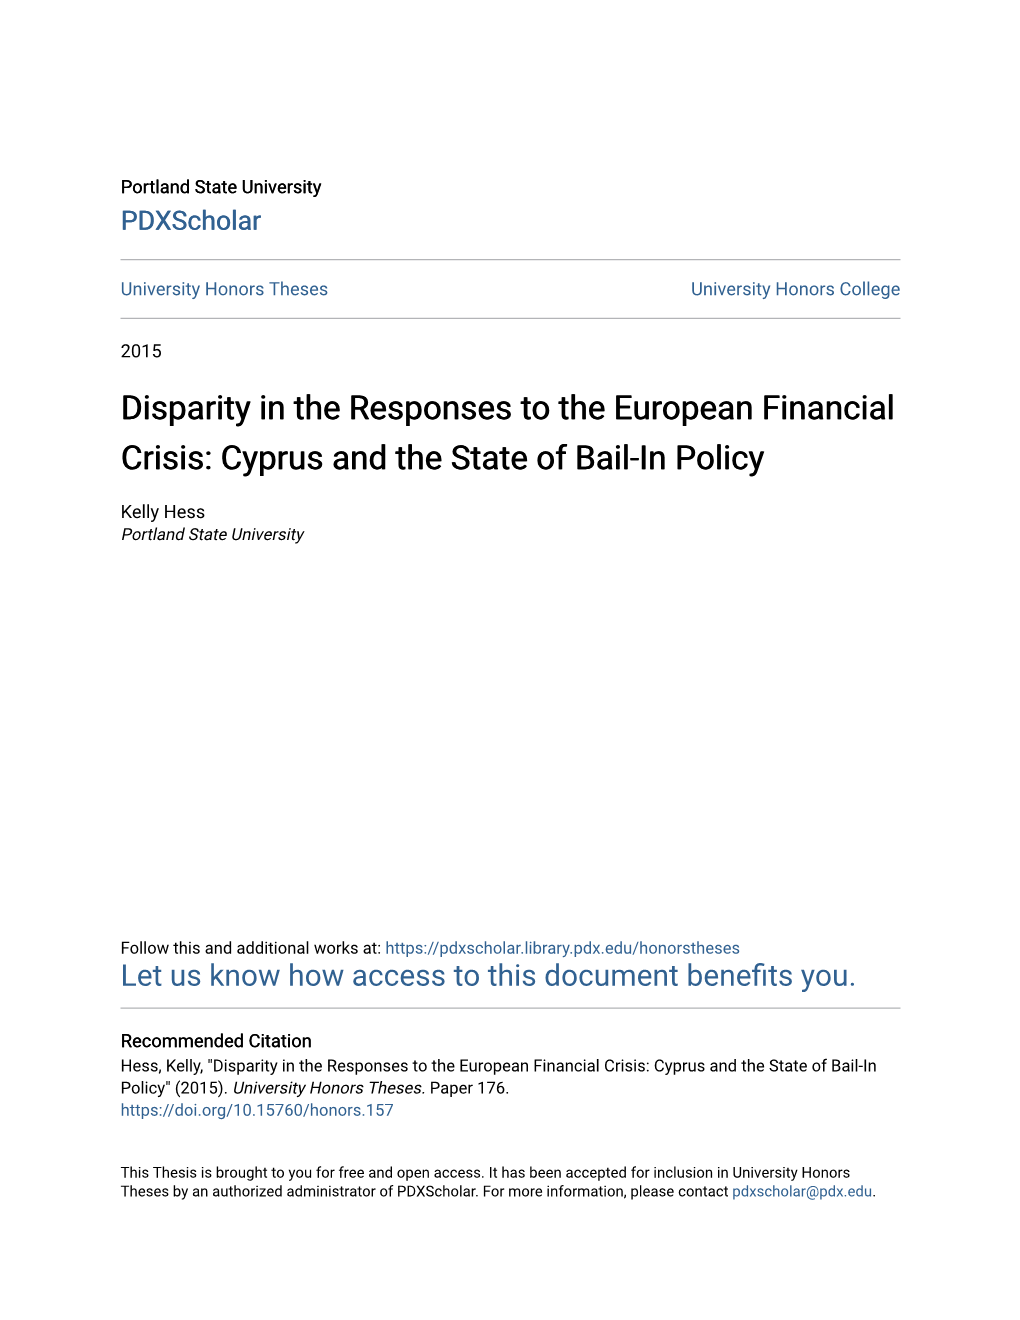 Disparity in the Responses to the European Financial Crisis: Cyprus and the State of Bail-In Policy